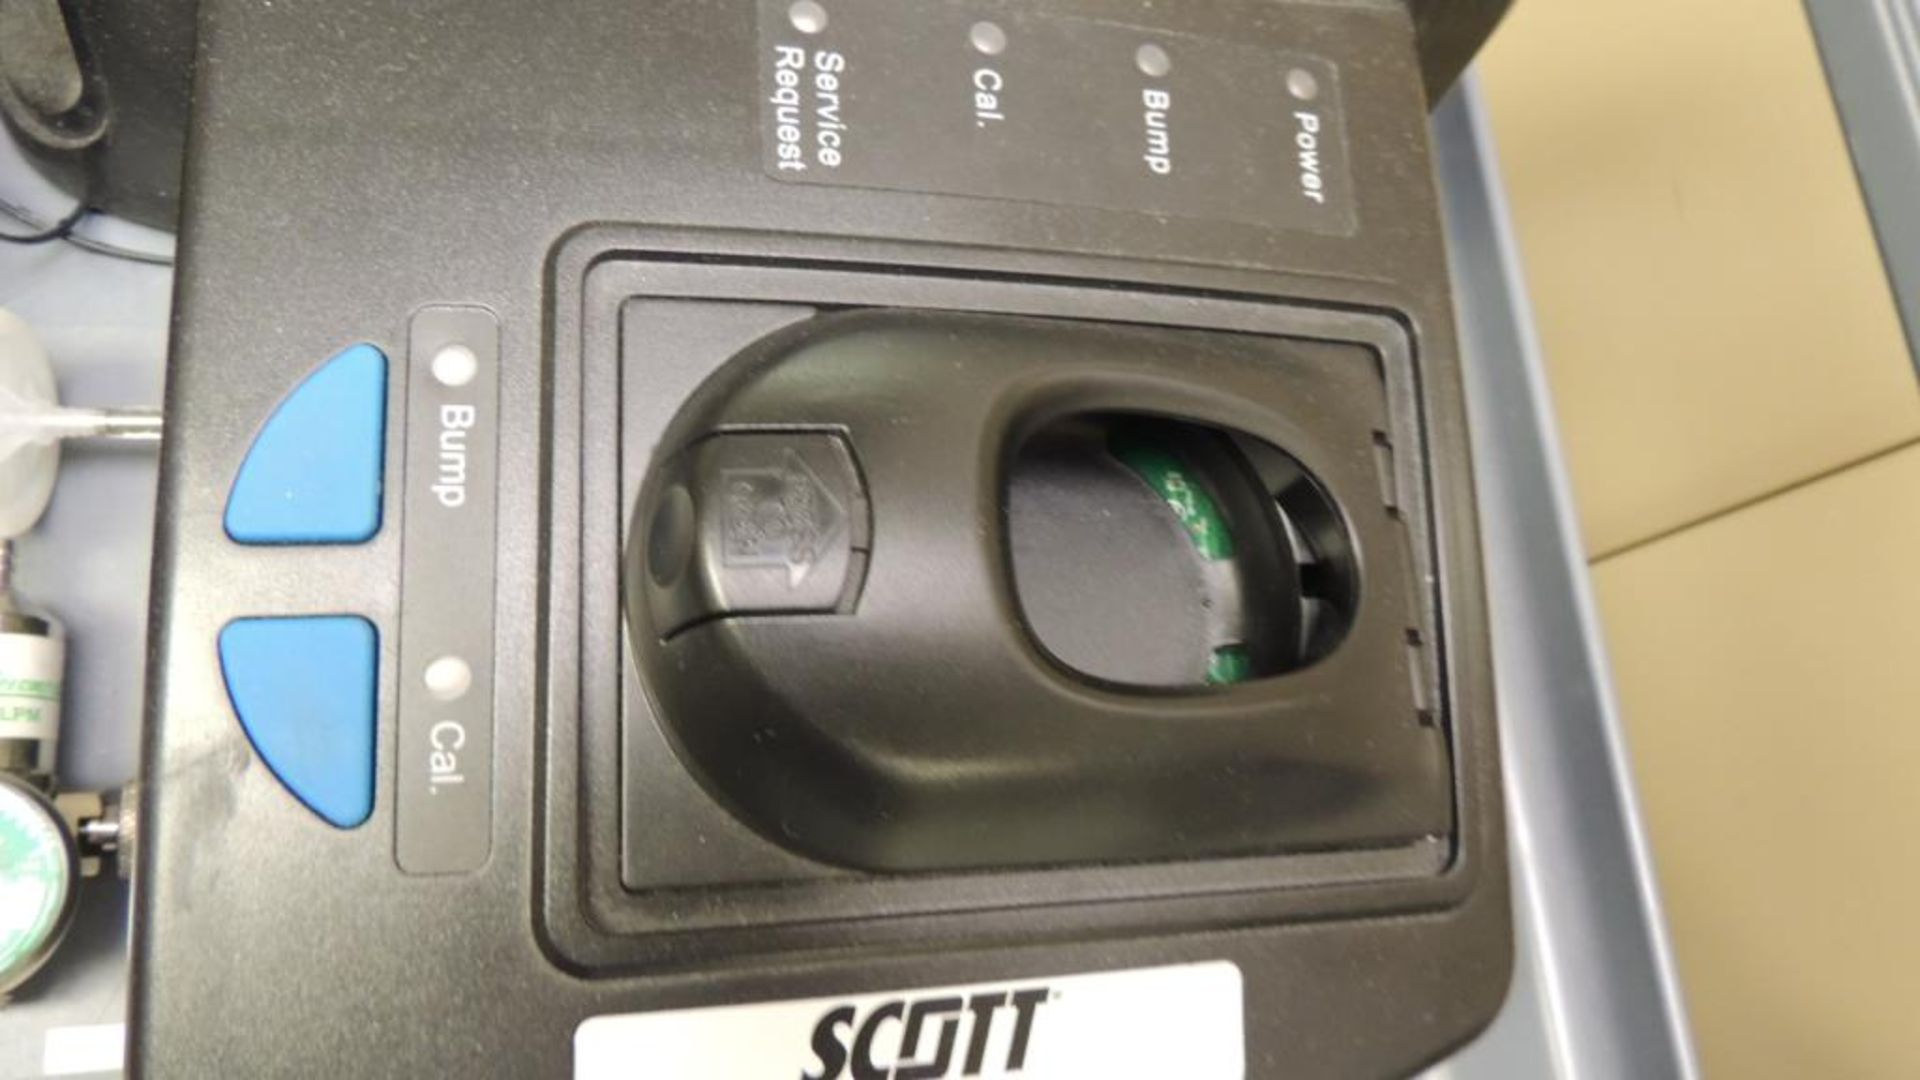 Scott Monitor; Masterdock for portable combustible /toxic gas monitor, includes cart and - Image 3 of 9